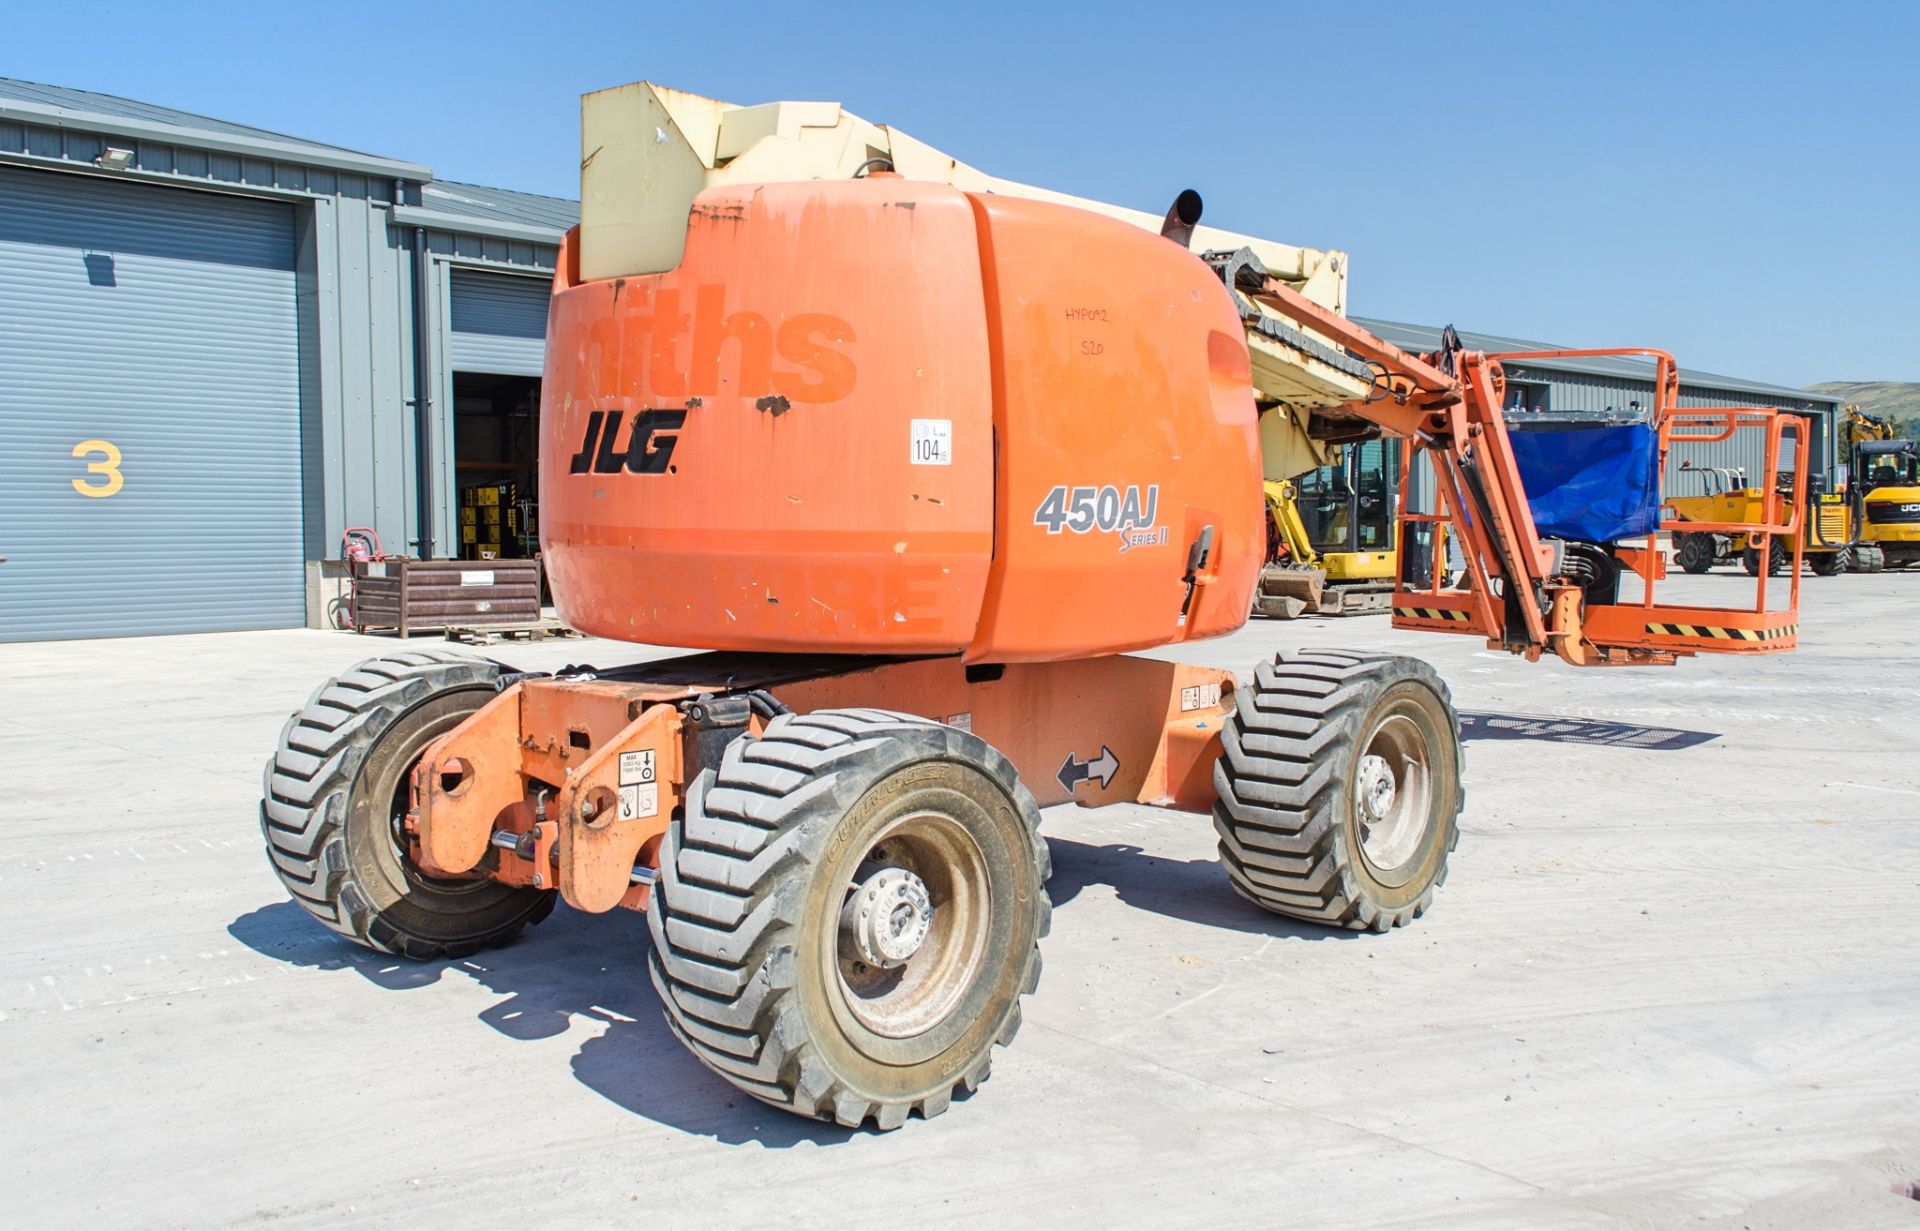 JLG 450AJ SII 45 foot diesel driven 4WD articulated boom lift Year: 2008 Recorded hours: 3300 S/N: - Image 4 of 18